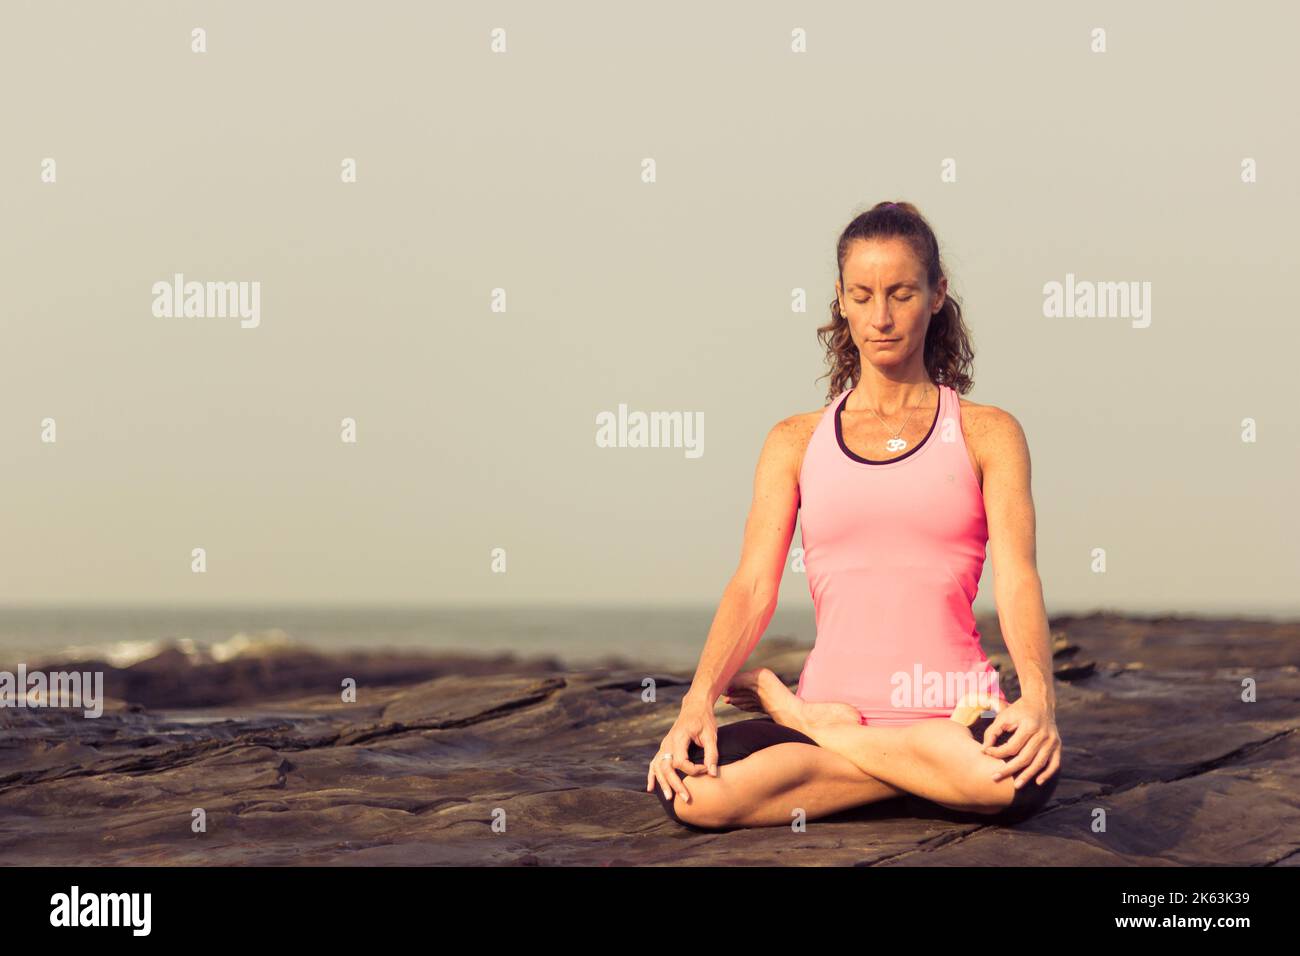 Young woman practicing yoga and meditation on the rocks by the sea in Vagator Beach, Goa, India. Relax, zen like, focus, self connection concept Stock Photo